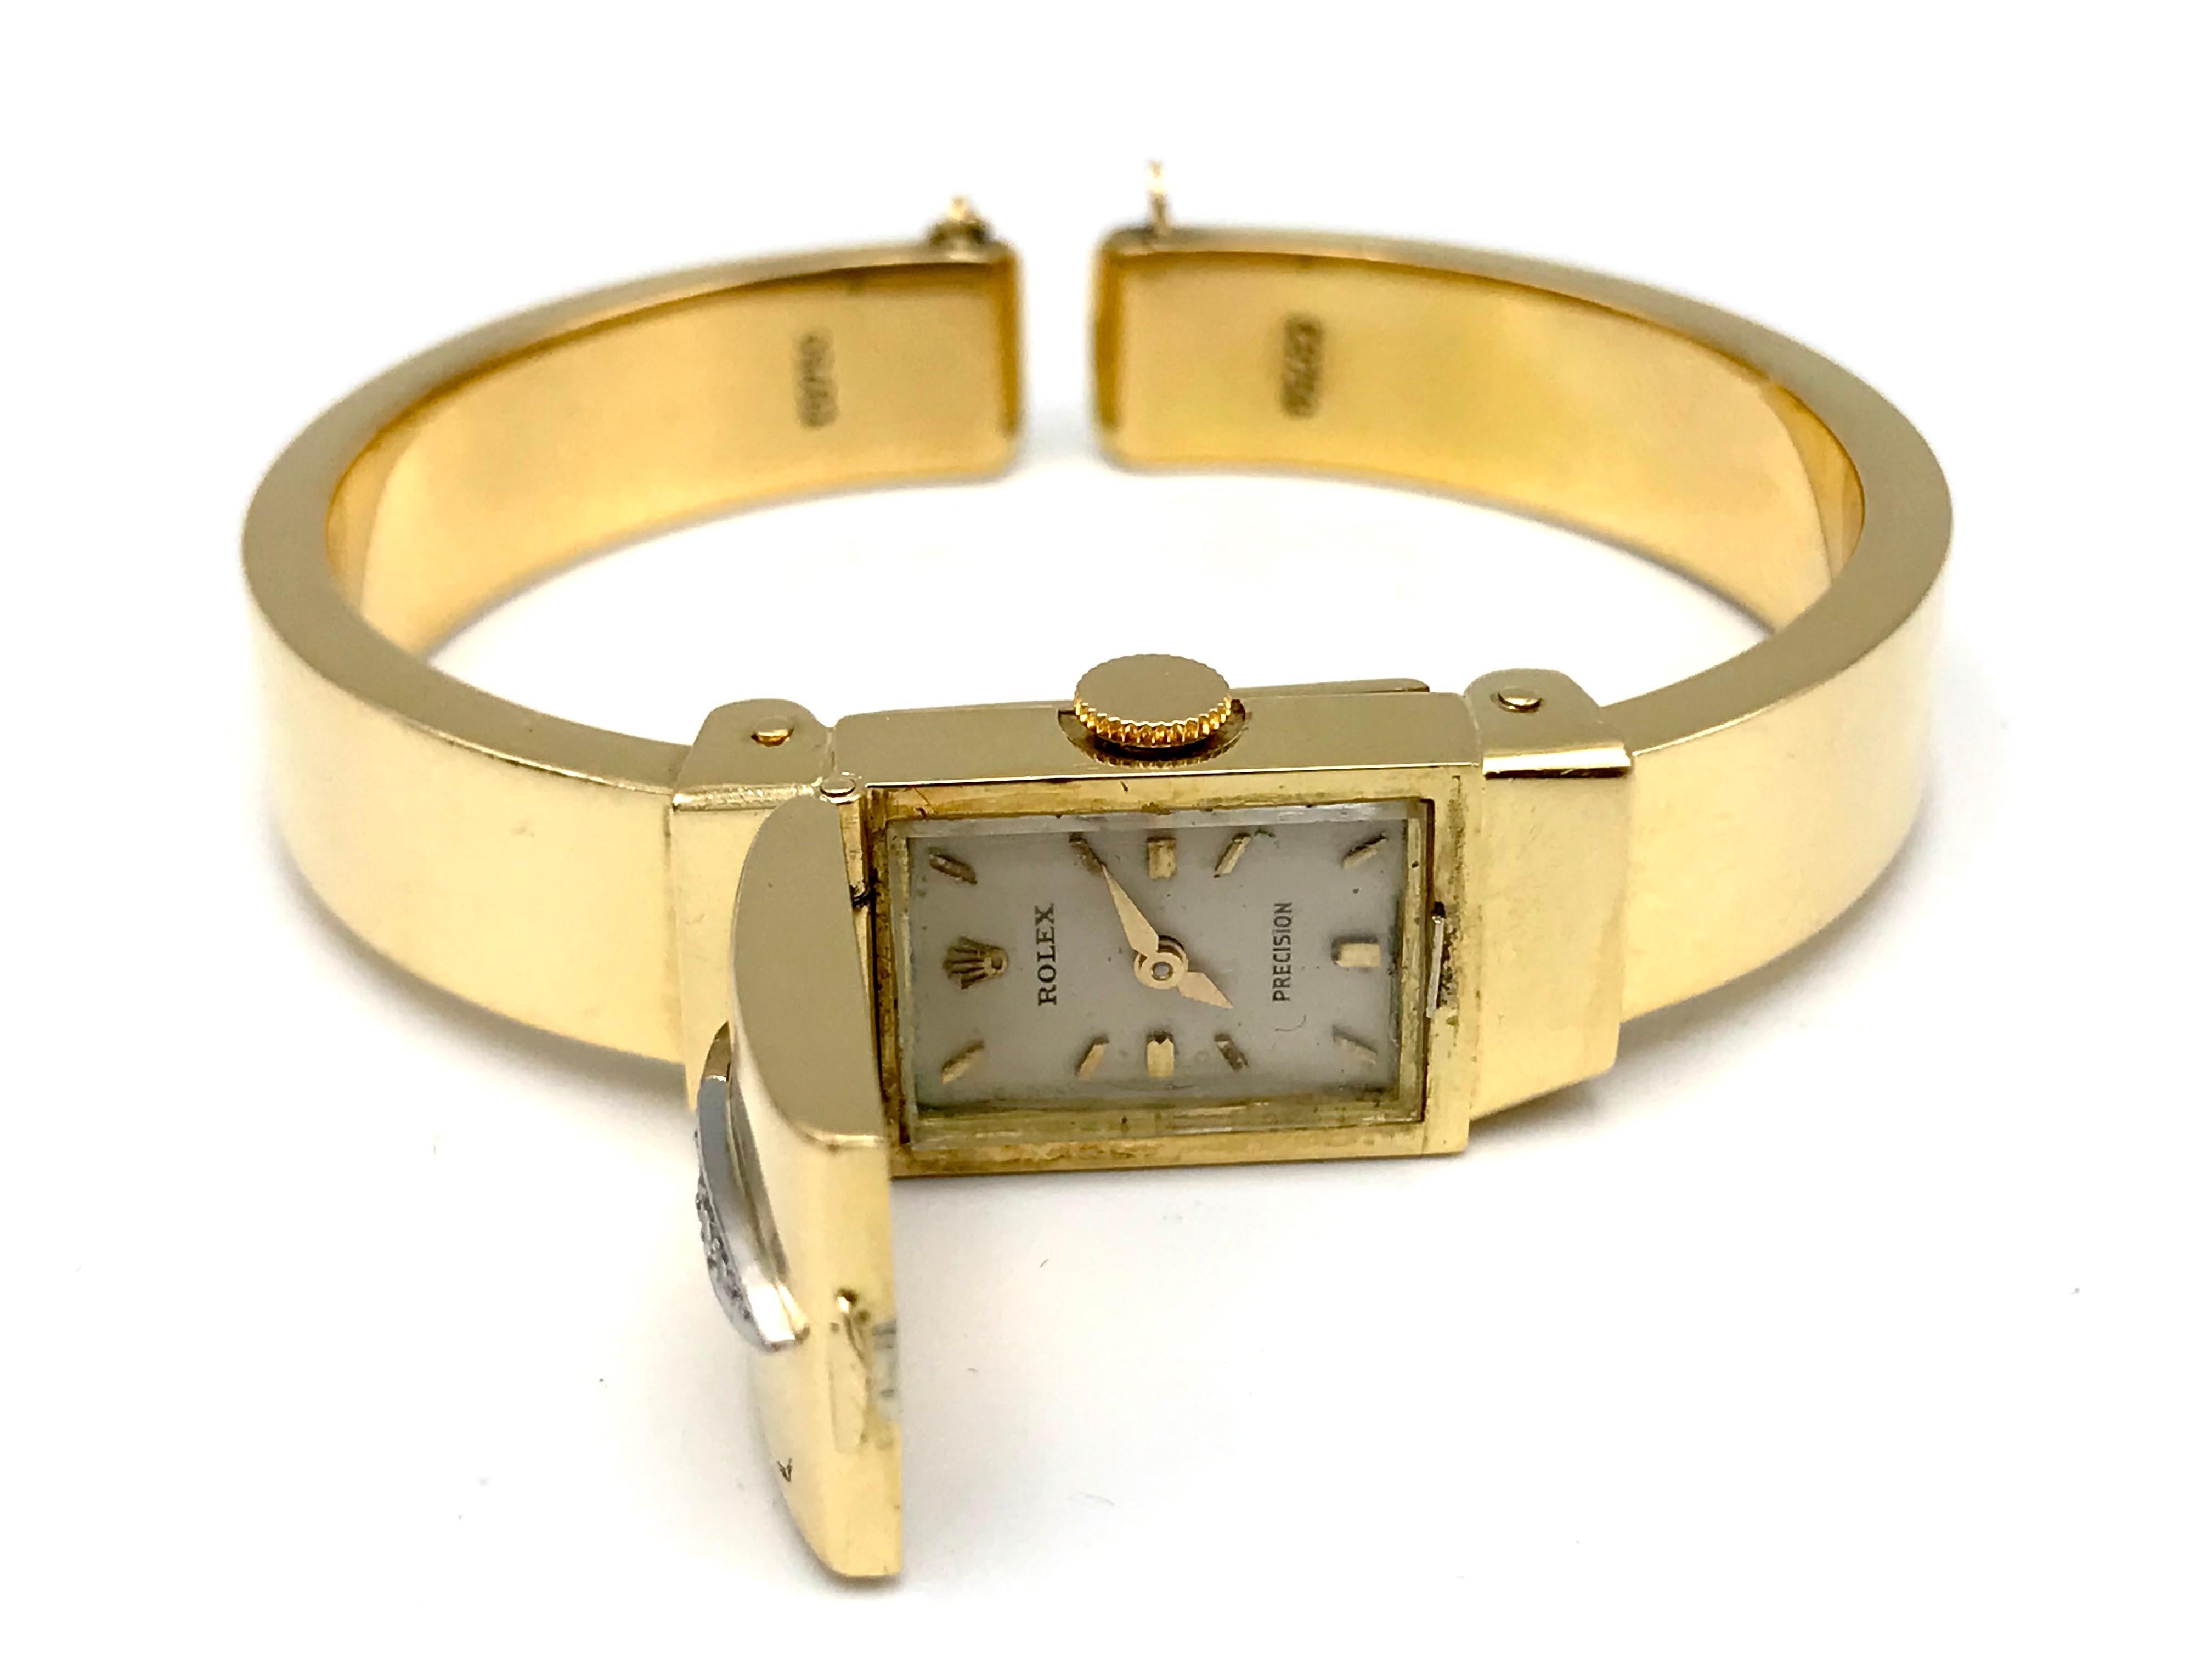 Stylish vintage (c. 1960s) wrist watch bracelet by Rolex. Made of 18k yellow gold, featuring diamond on top of the hinged cover. 
The watch is mechanical. Features gold hour and minute hands. The cuff bracelet has a safety chain. 
The dial signed